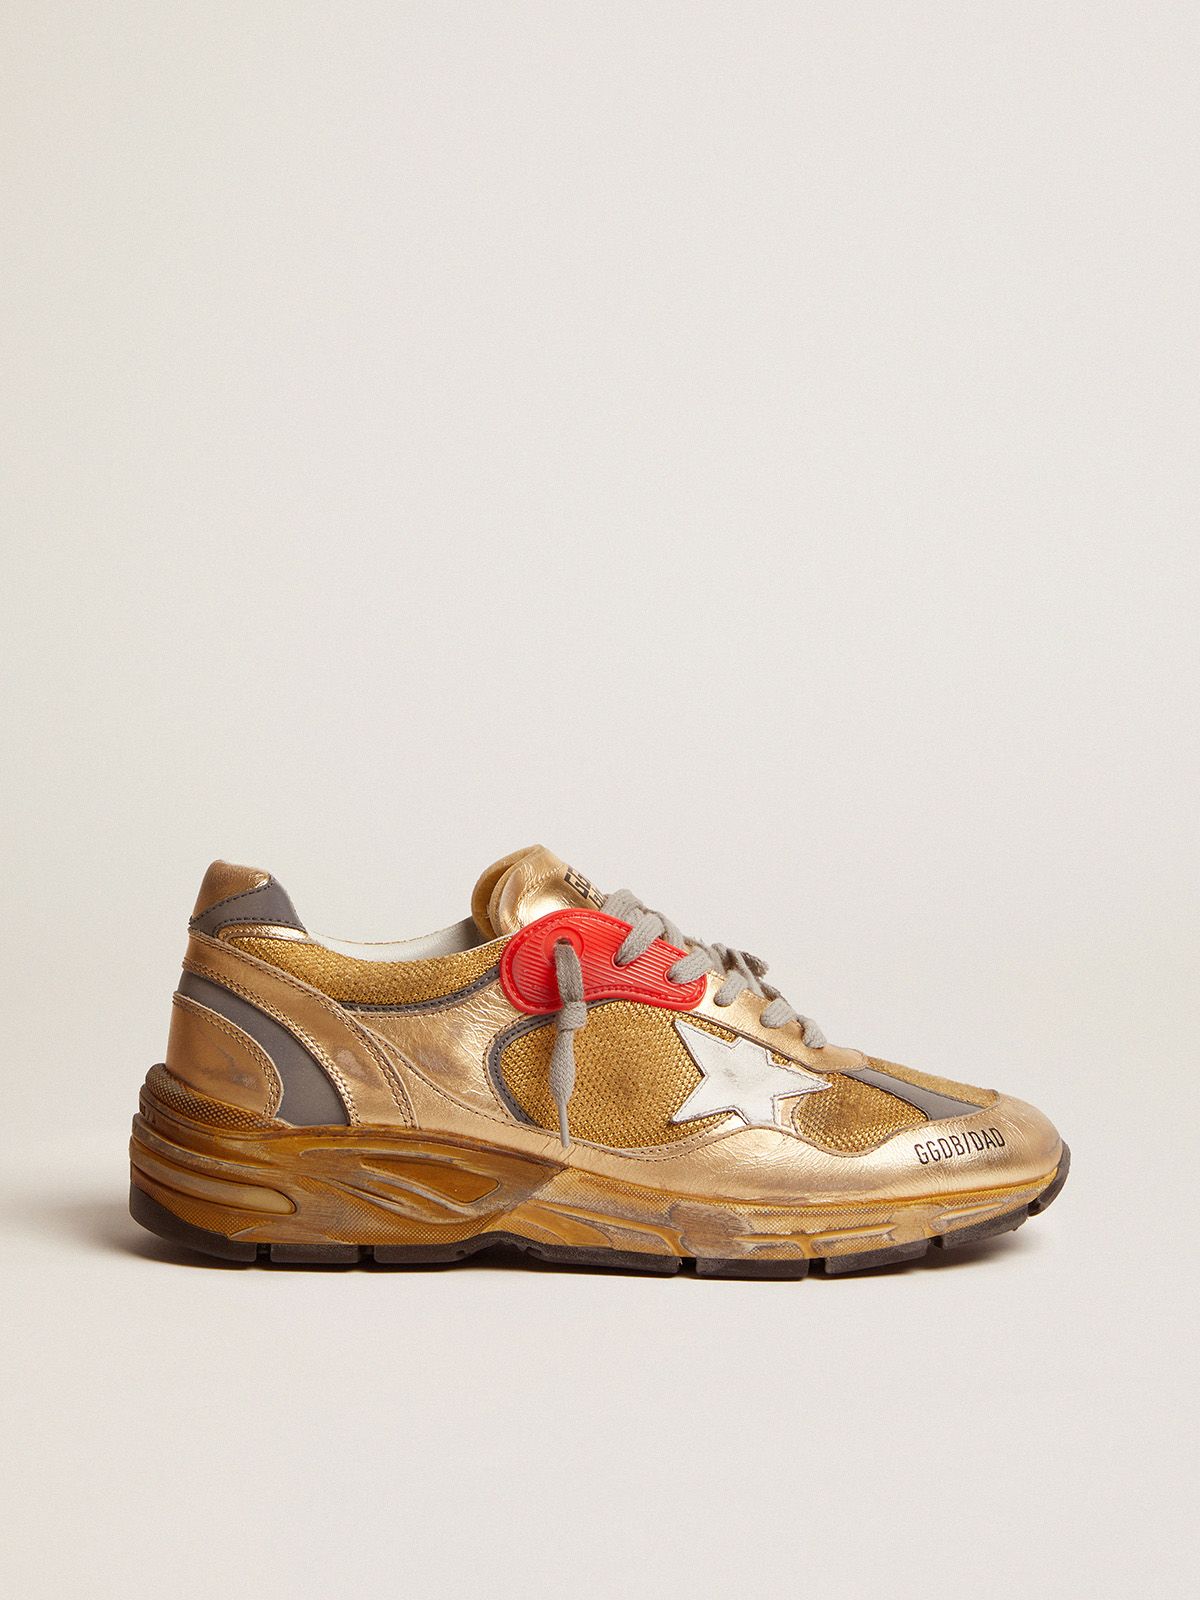 Goldengoose Ball Star Gold Dad-Star sneakers with distressed finish